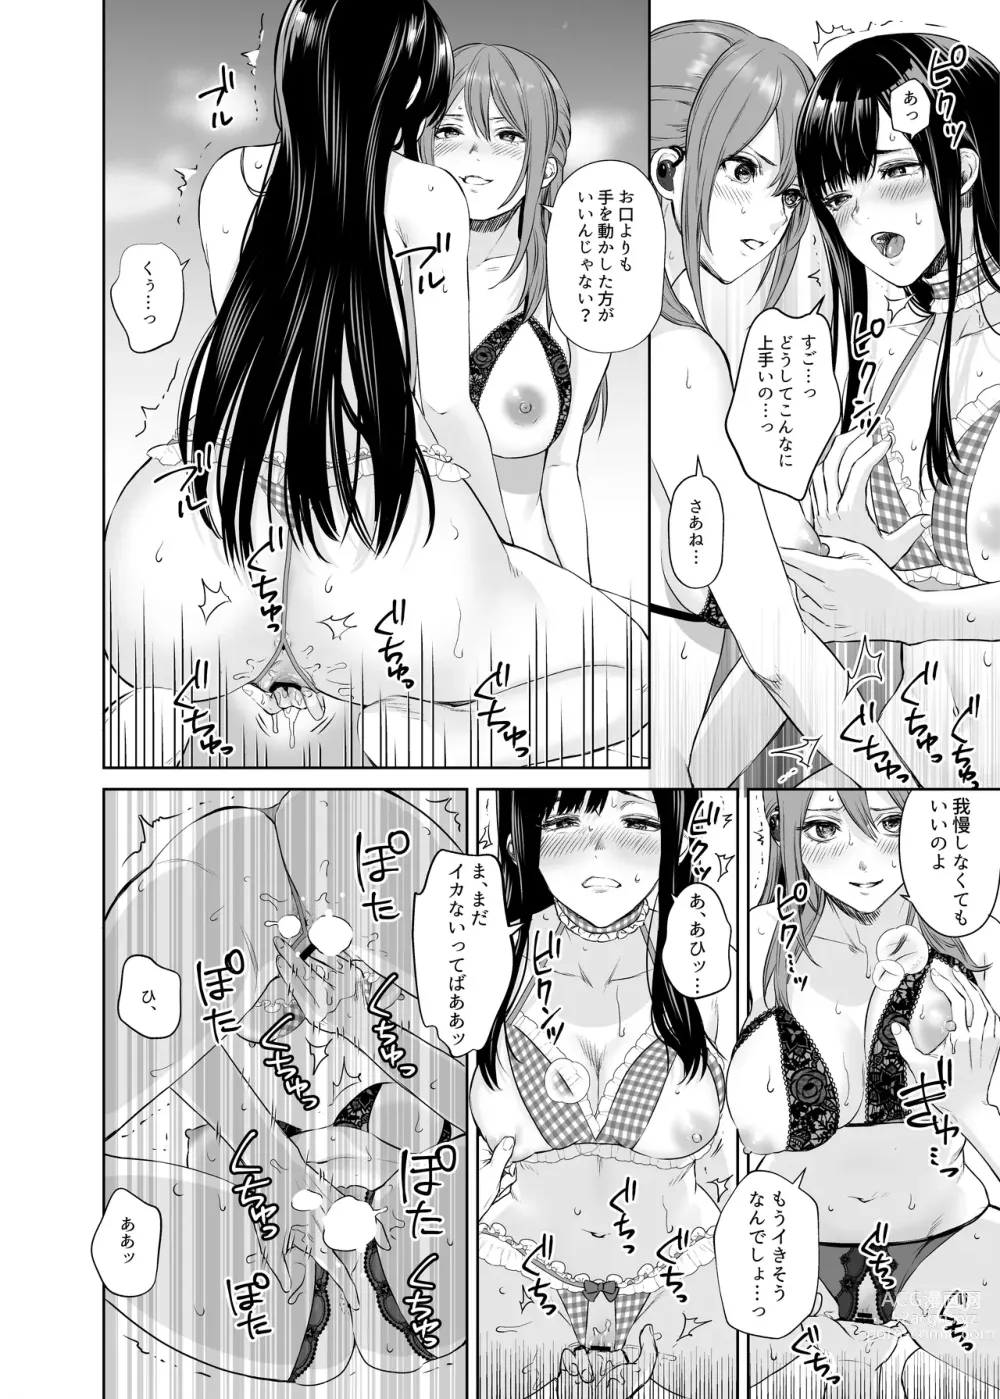 Page 10 of doujinshi LesFes Co Candid Reporting Vol. 004